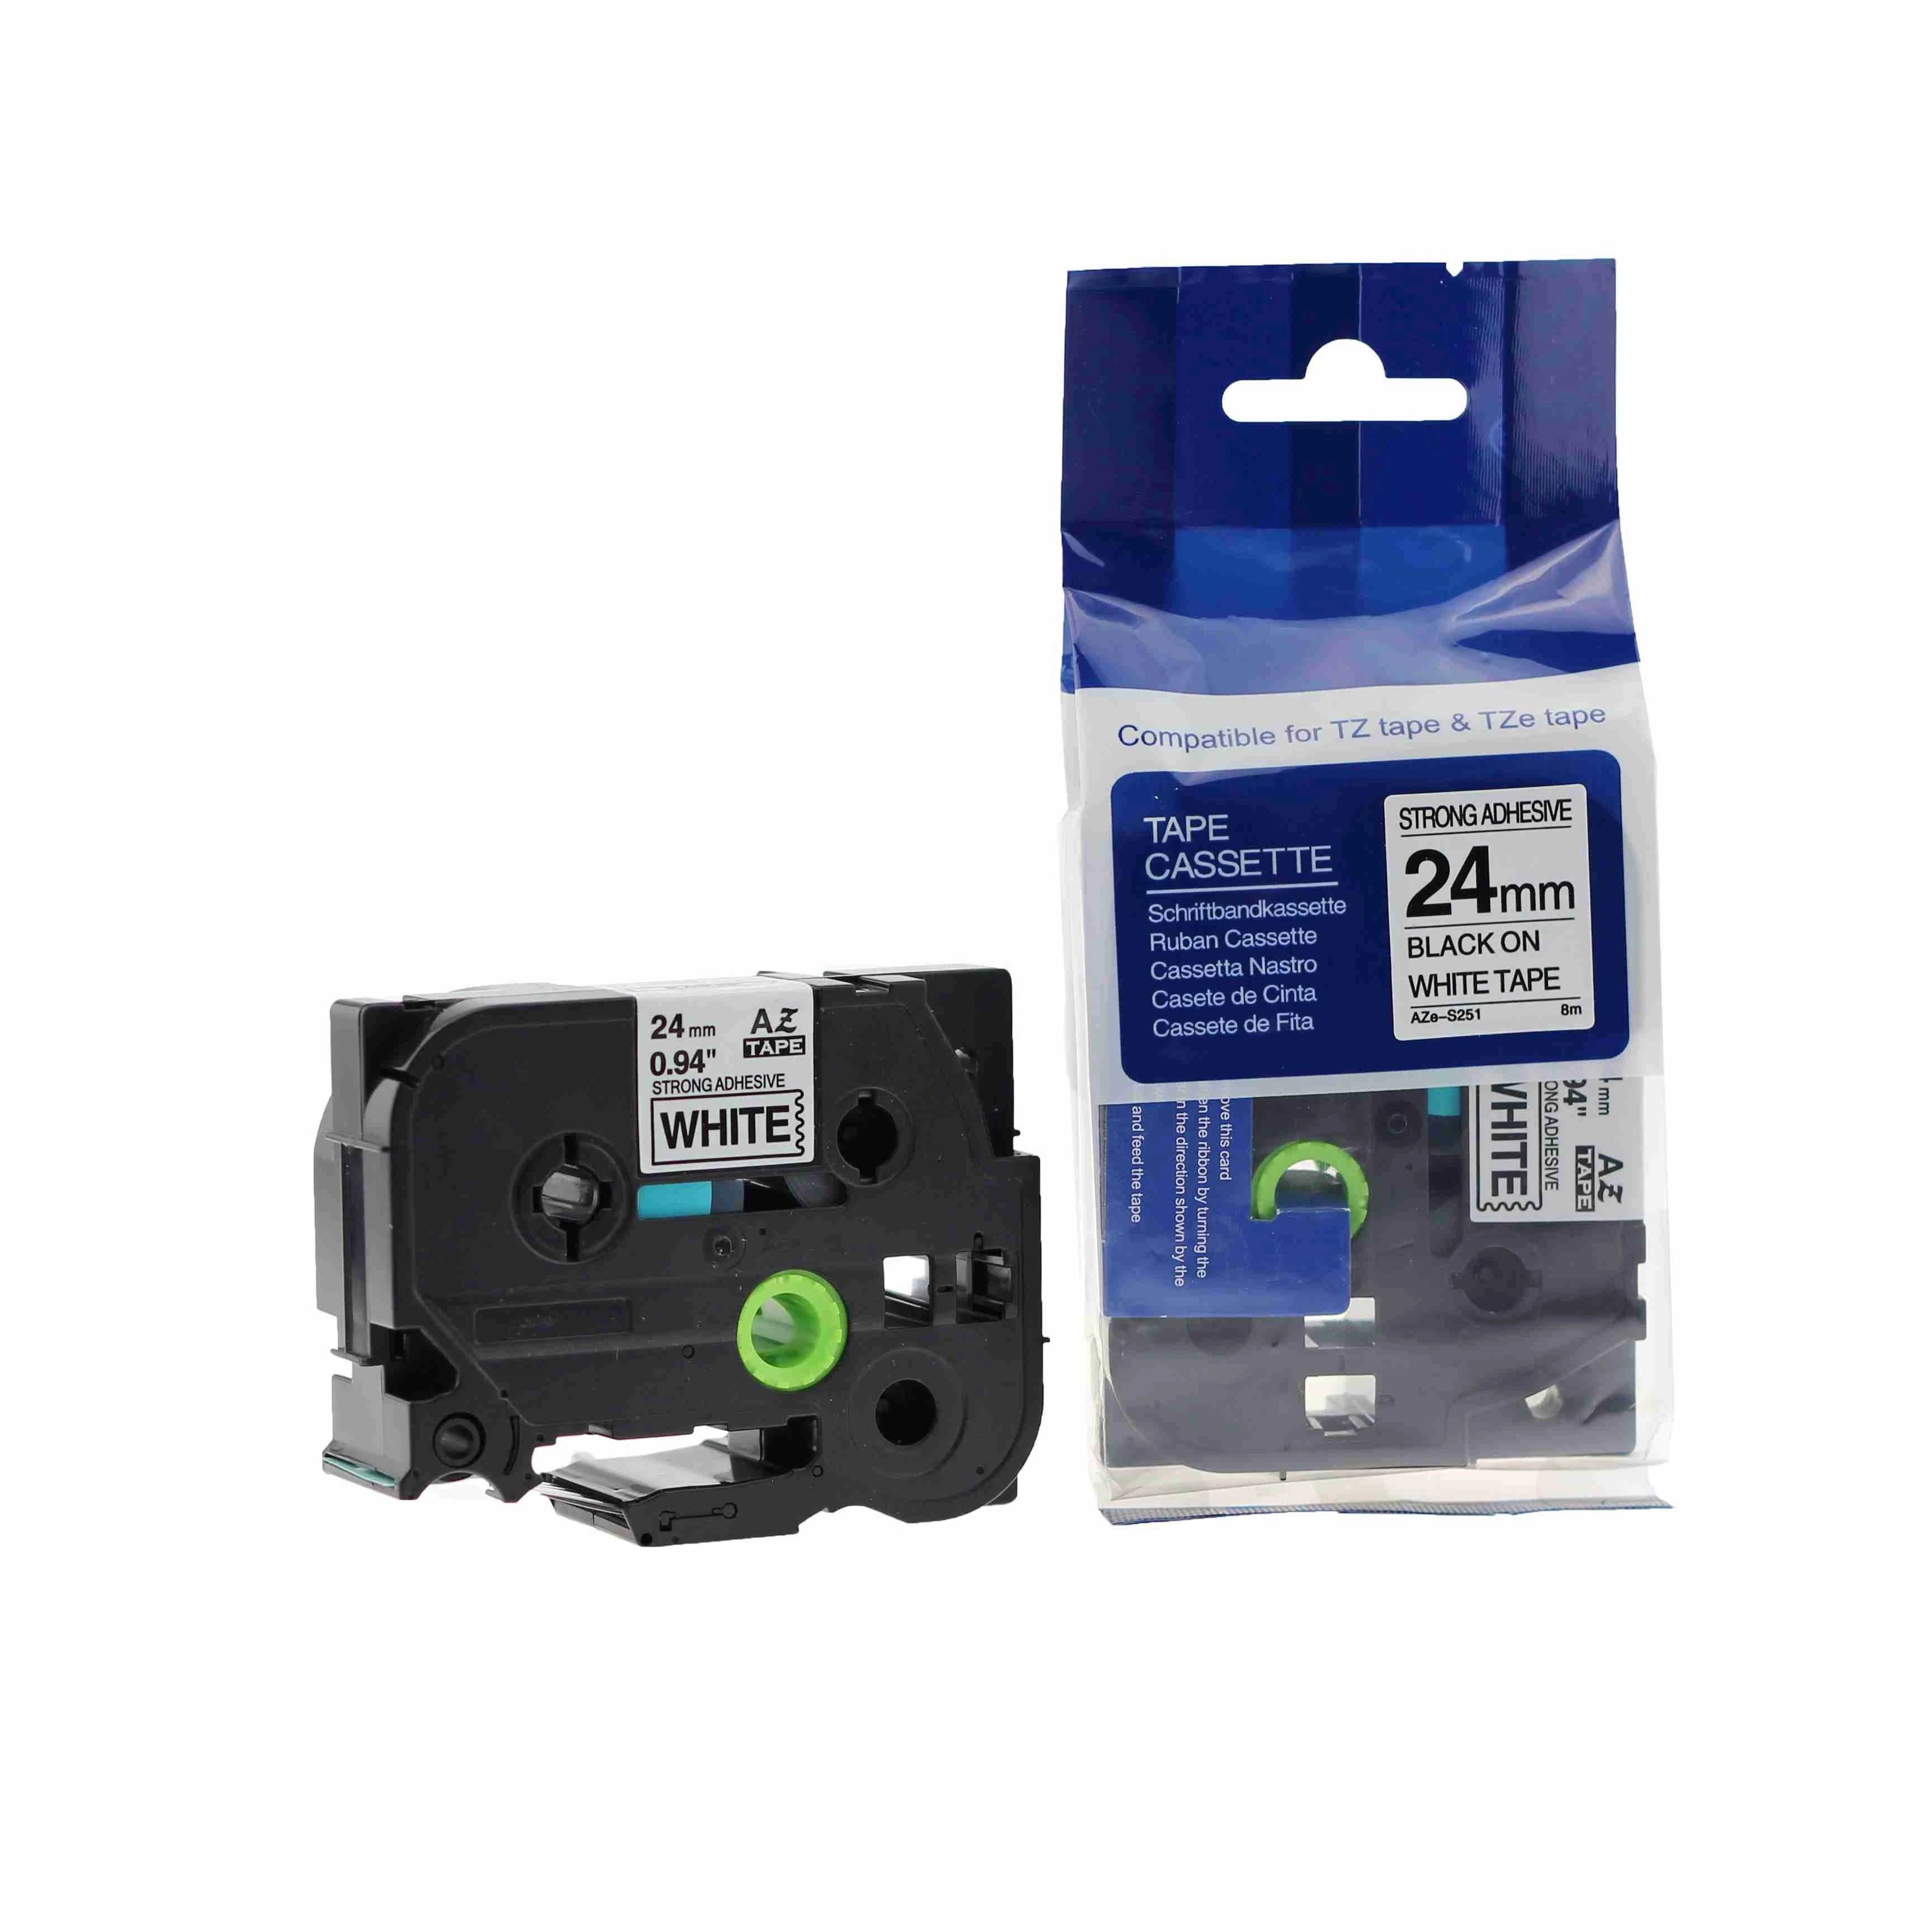 24 mm P-touch TZ tape cartridge Tze-S251 tz-s251 black on white label printer tape suitable for brother label maker printers